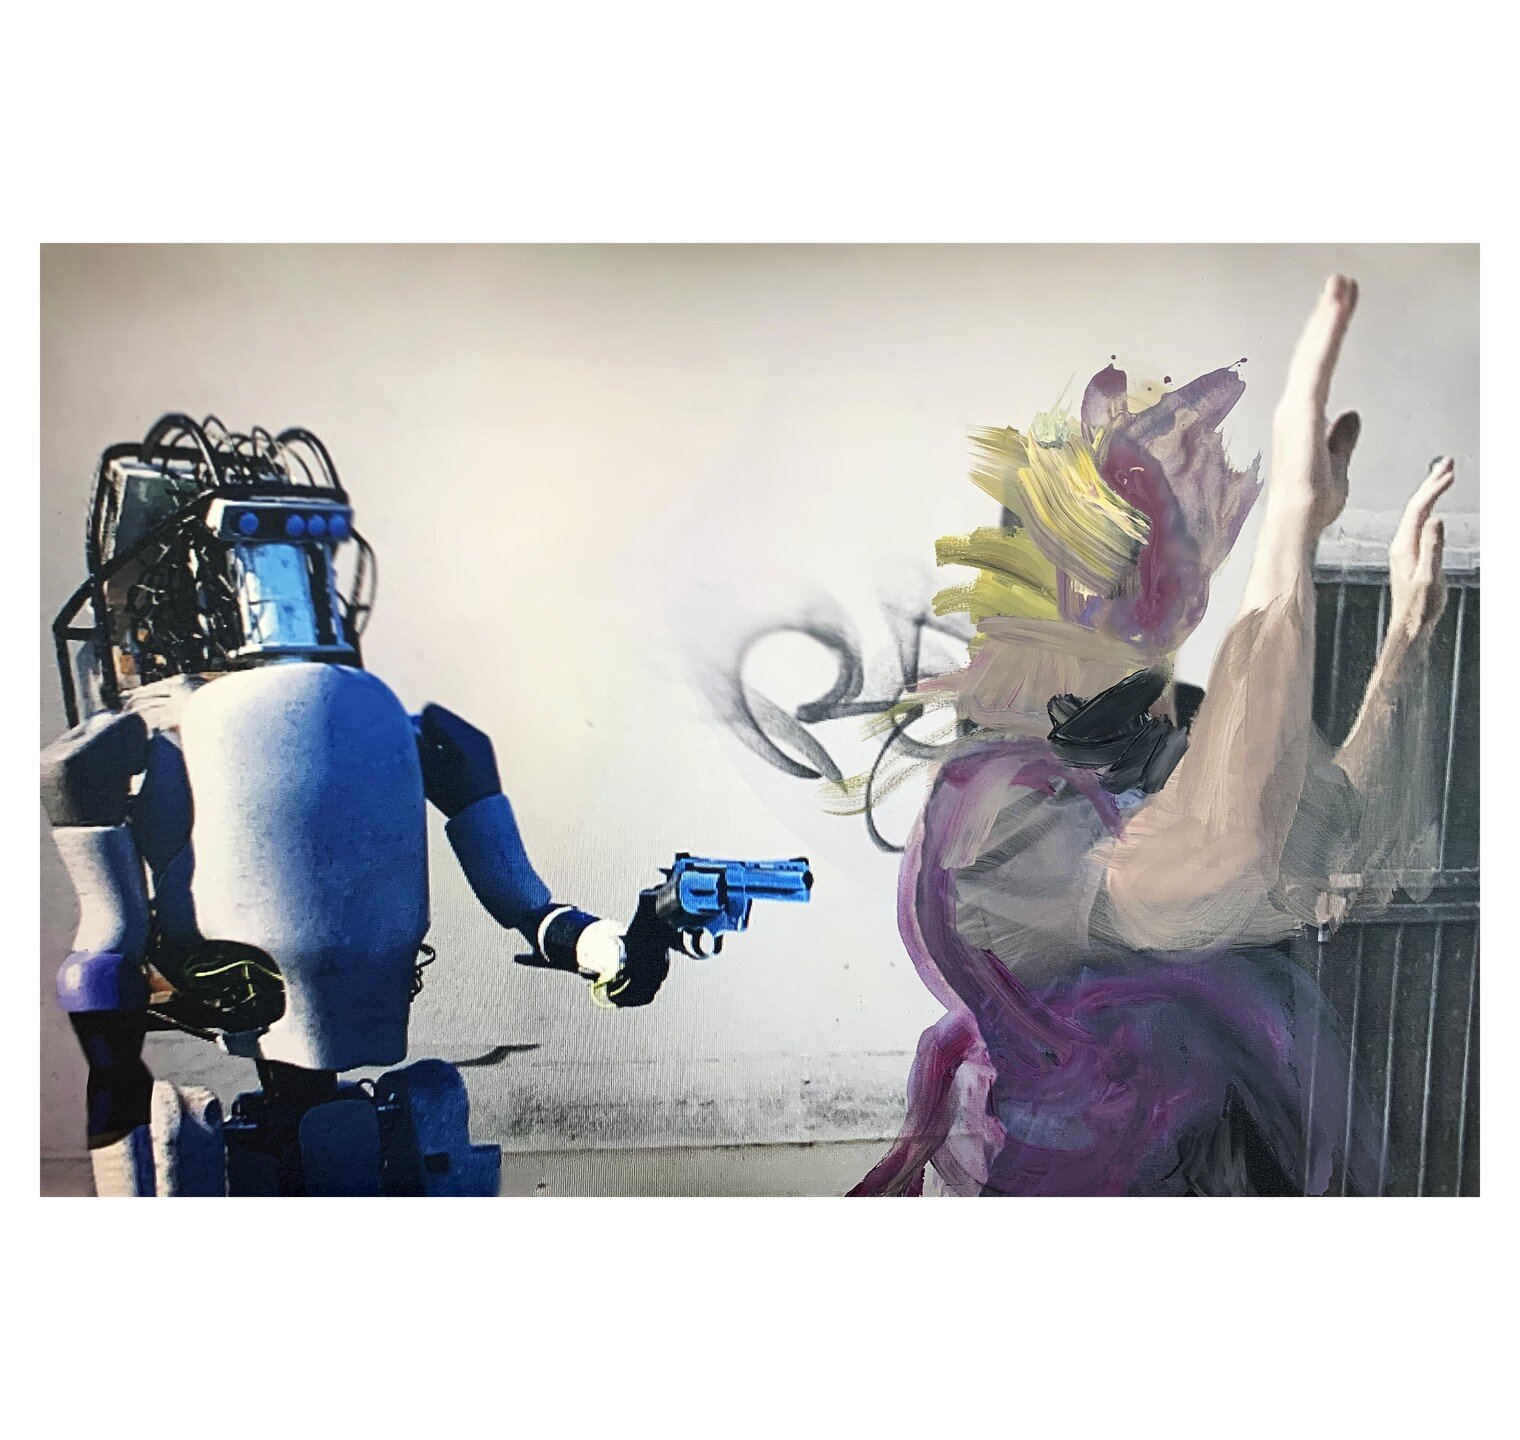 Ai, arrest... I came across this painting that I made a few months ago and now feels right and relevant to post. The painting feels fresh (amazingly like a third hand) and gets the expression right as he is arrested by the robot. #expressiveart #ai #